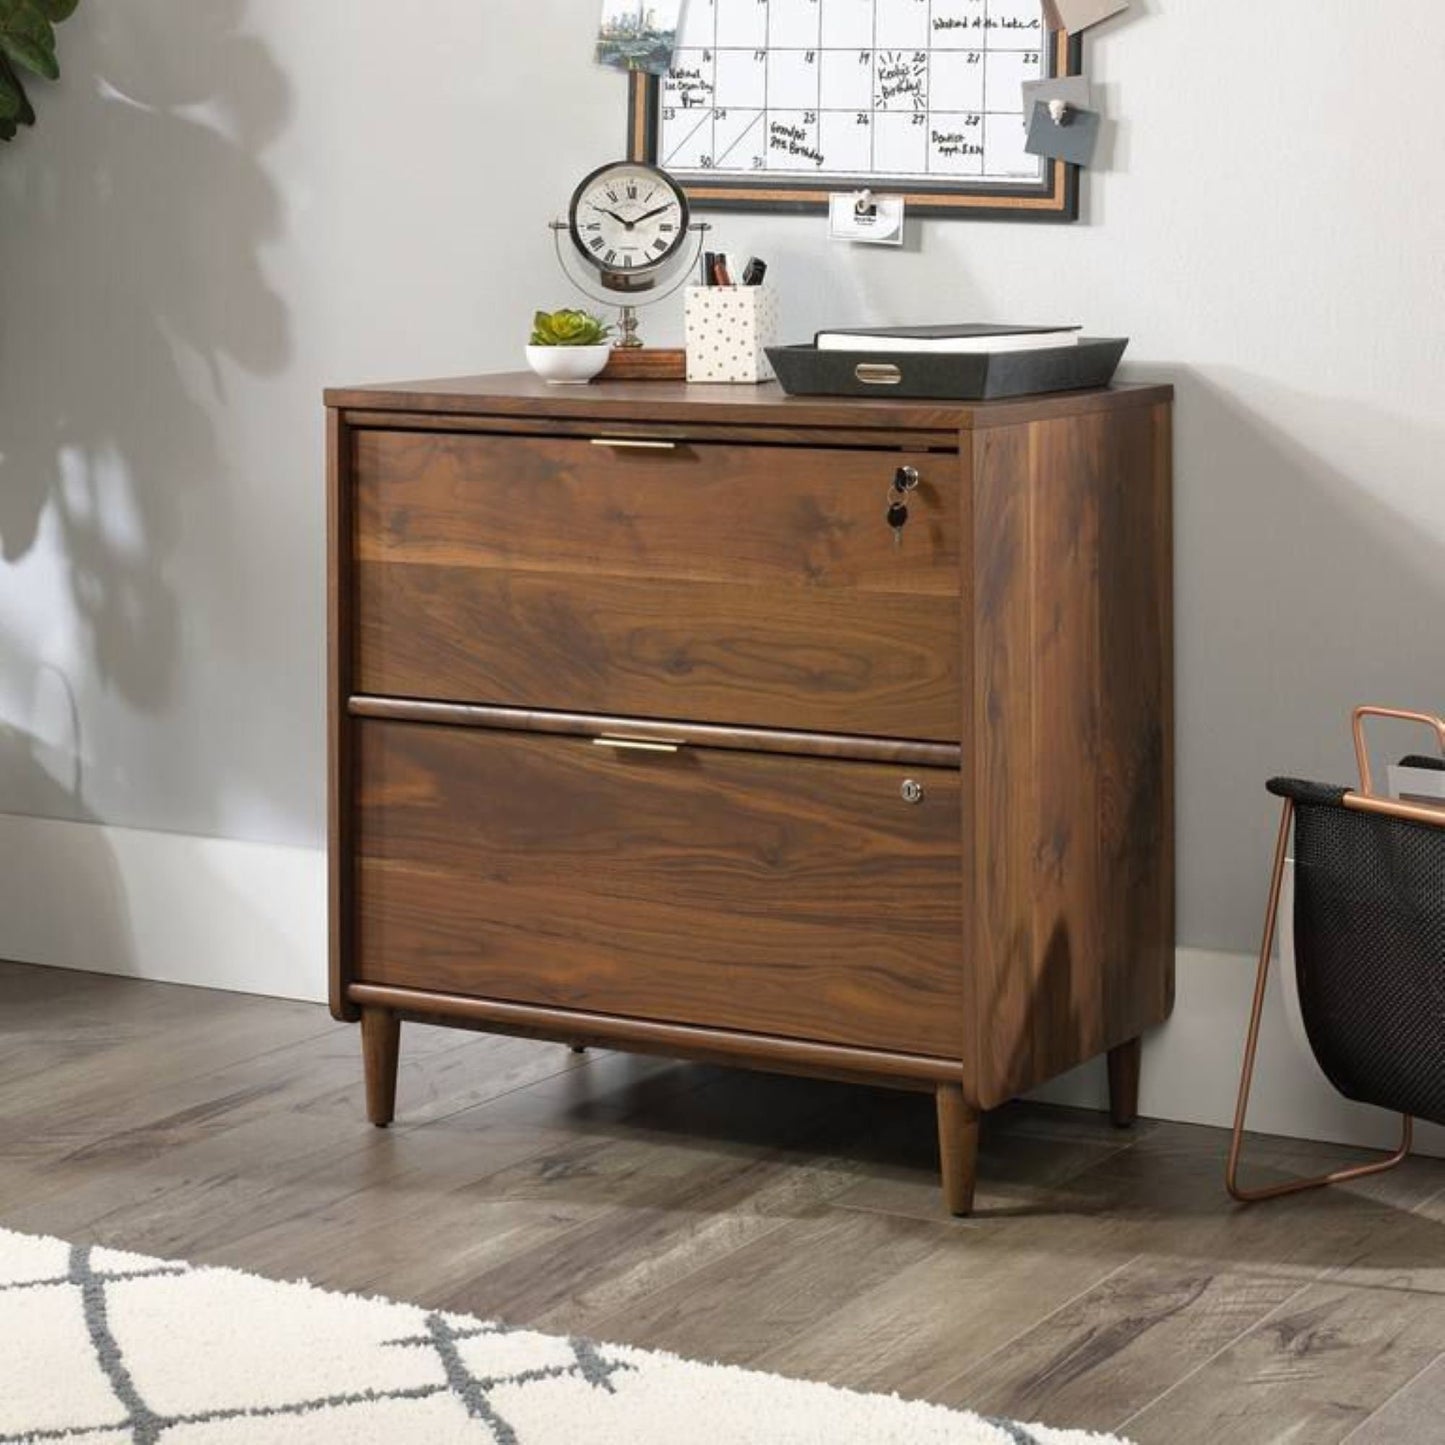 Elegant lateral filer in Walnut finish in Smart Mid Century/ Retro styling with brass handles